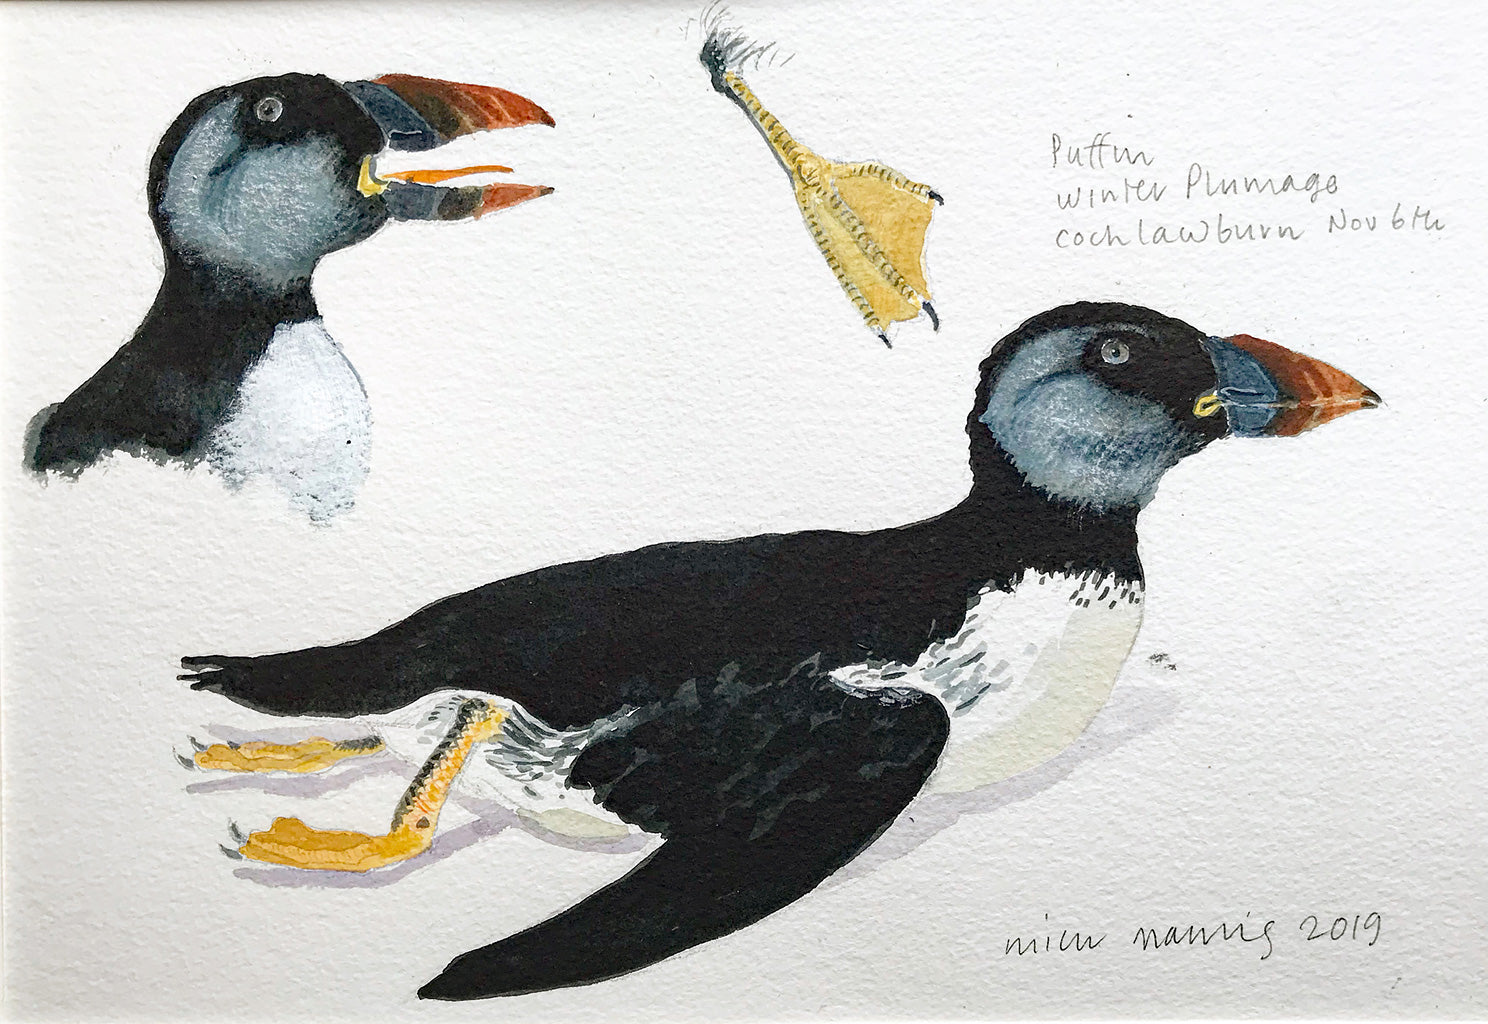 Storm-driven Puffin in Winter Plumage - Mick Manning - St. Jude's Prints